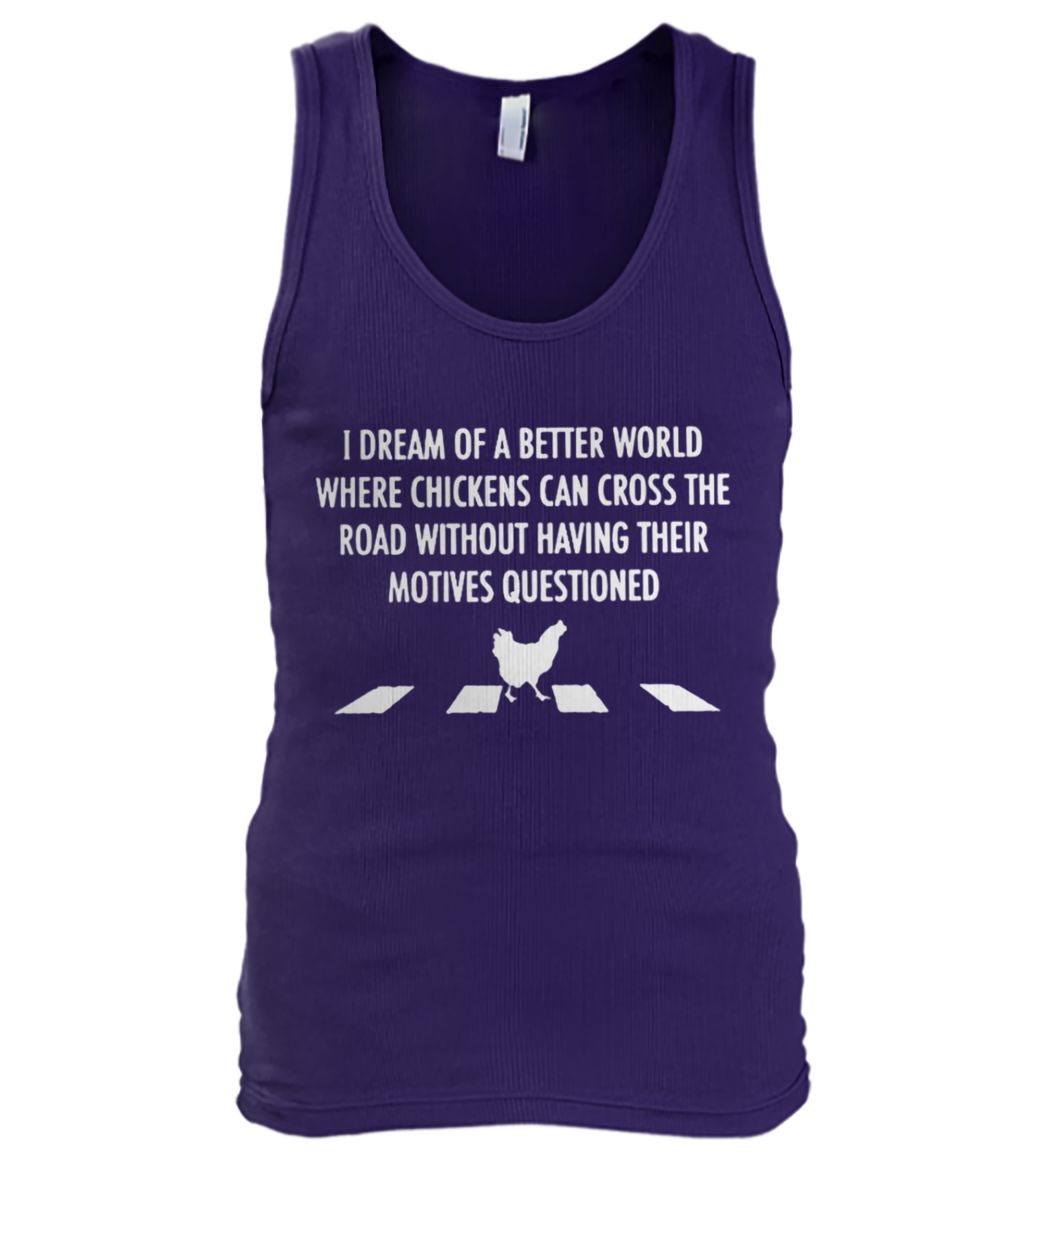 I dream of a better world where chickens can cross road men's tank top